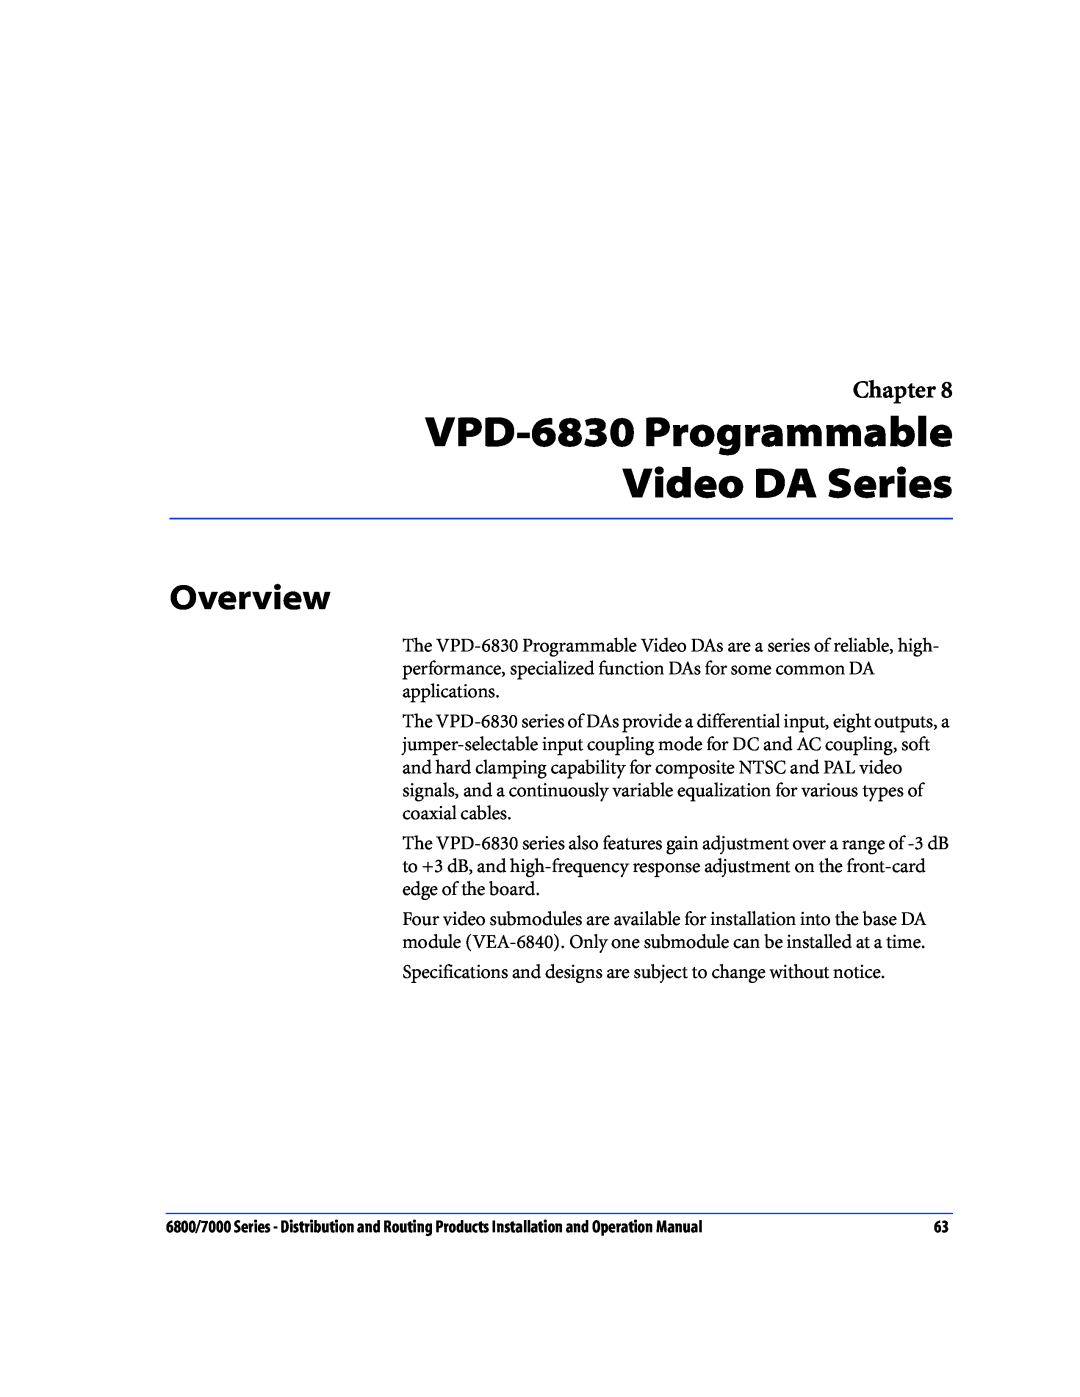 Nokia 6800 Series, 7000 Series operation manual VPD-6830 Programmable Video DA Series, Overview, Chapter 